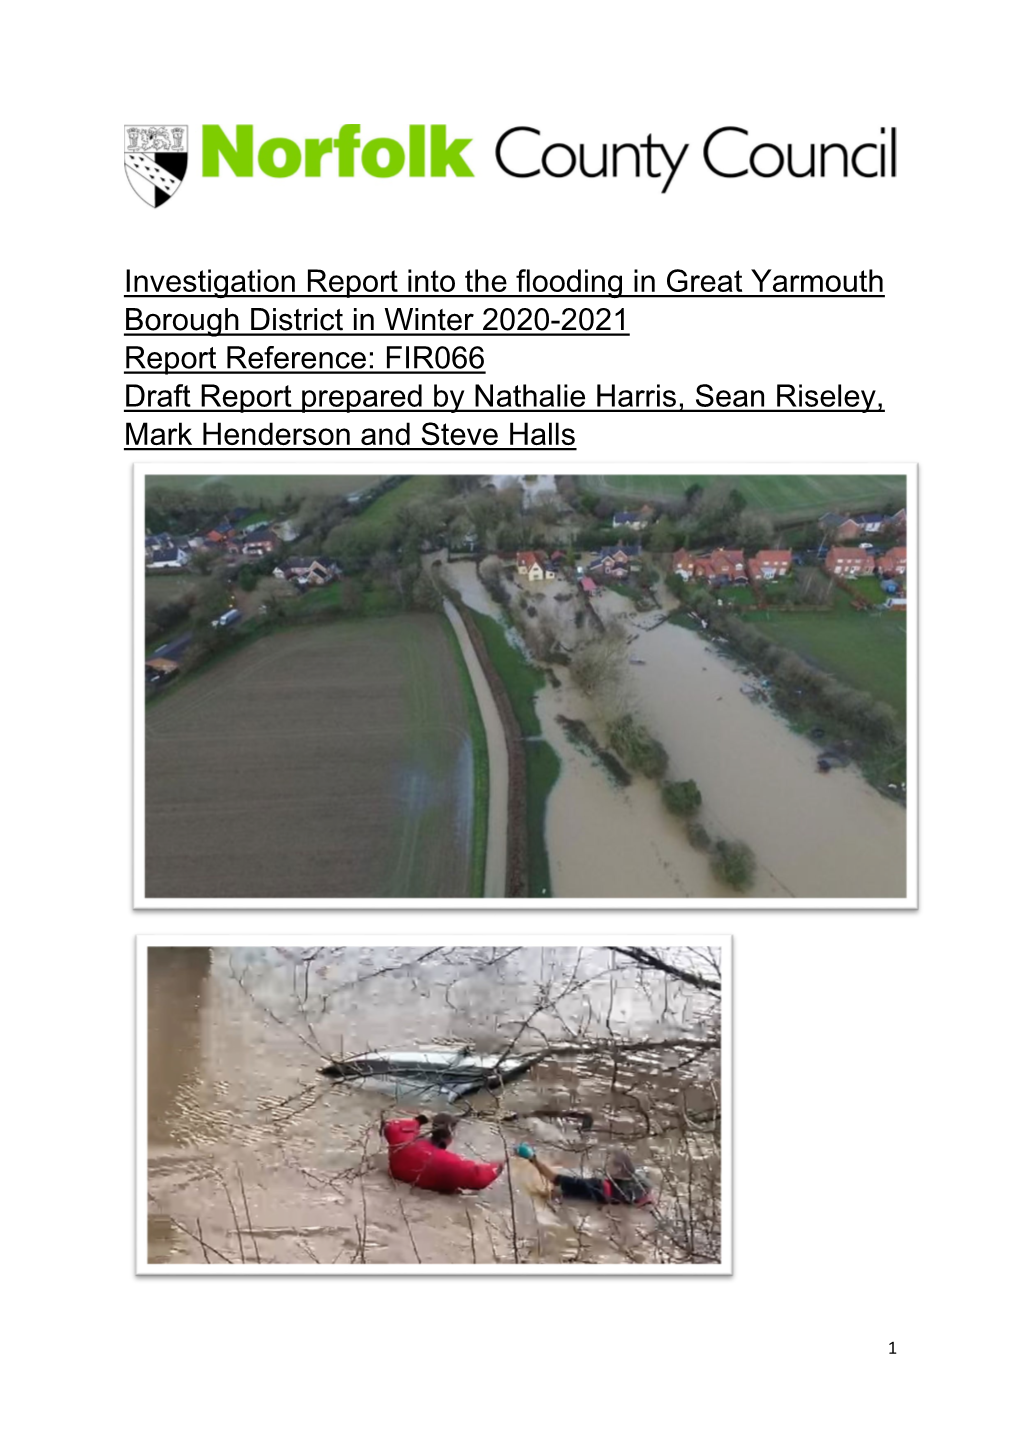 Great Yarmouth Borough District in Winter 2020-2021 Report Reference: FIR066 Draft Report Prepared by Nathalie Harris, Sean Riseley, Mark Henderson and Steve Halls